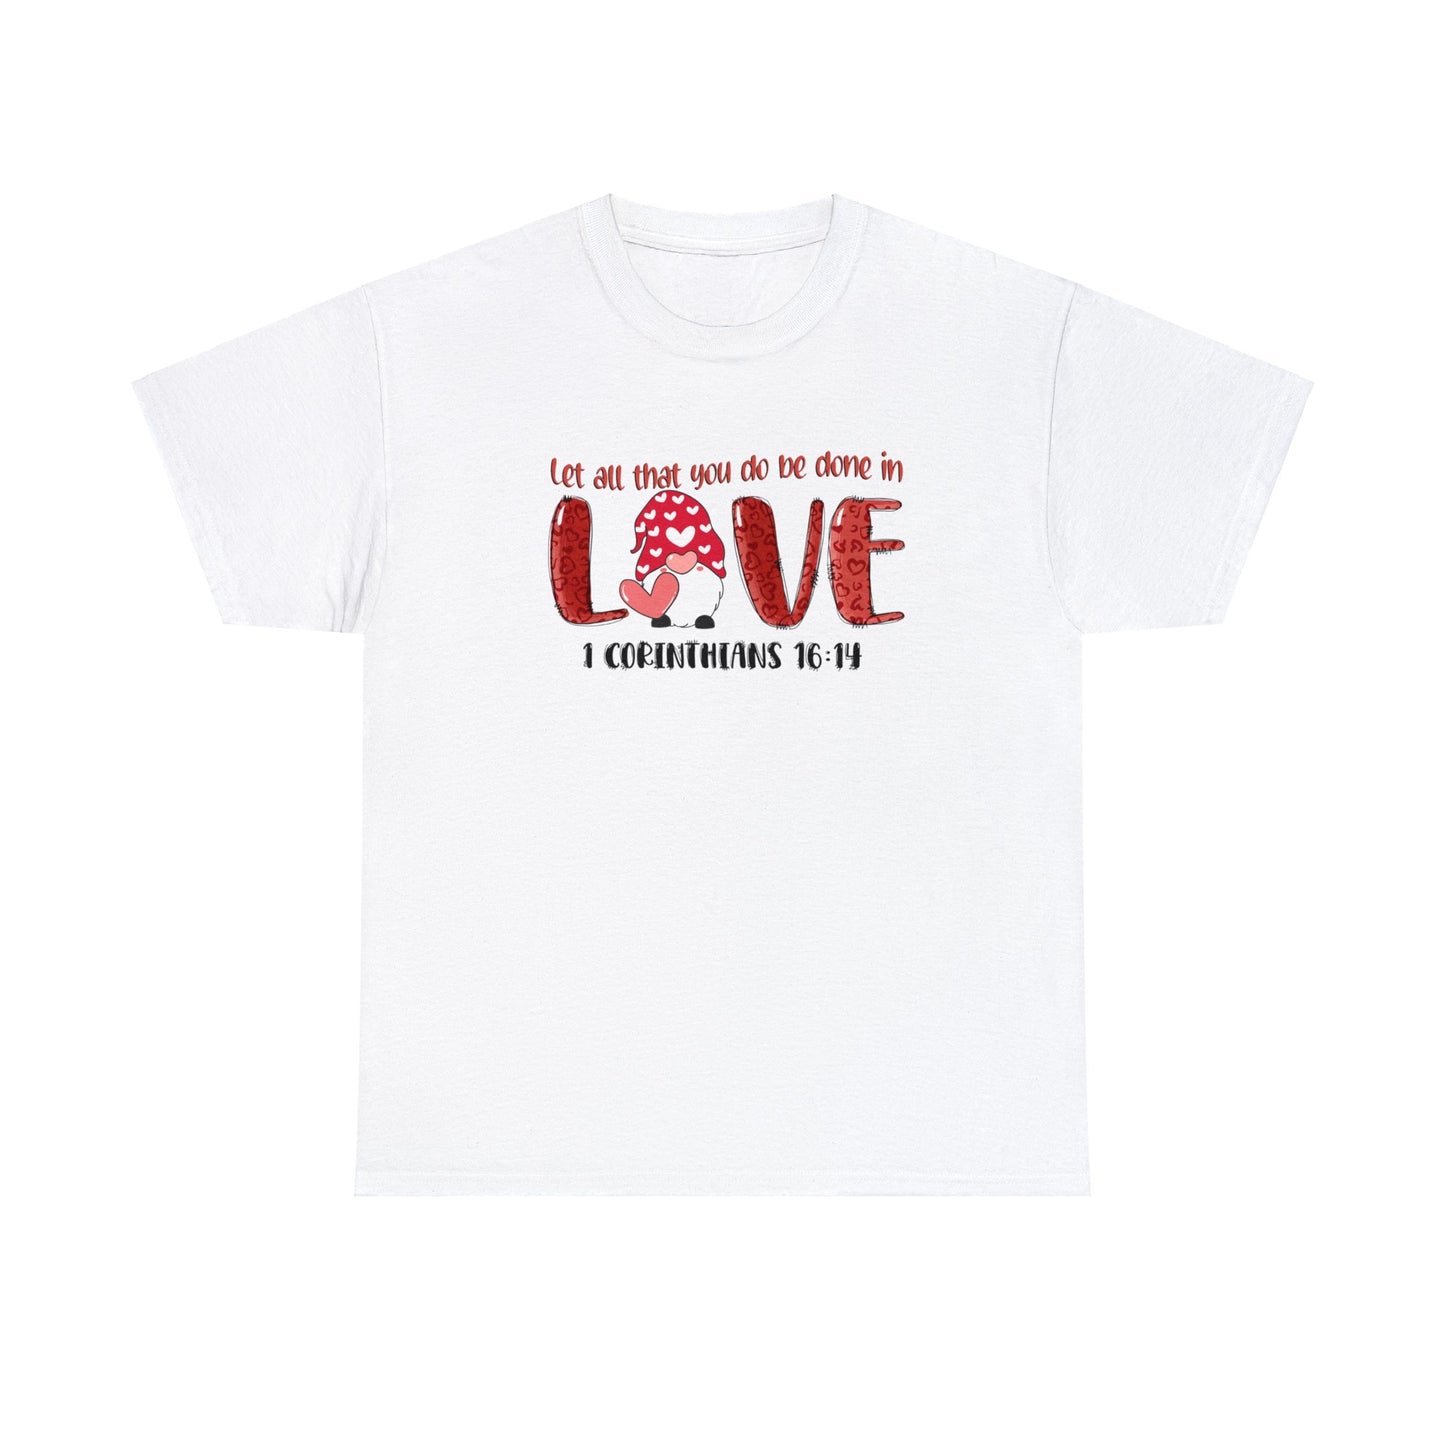 Let all you do be done in love - Gildan Unisex Heavy Cotton Tee